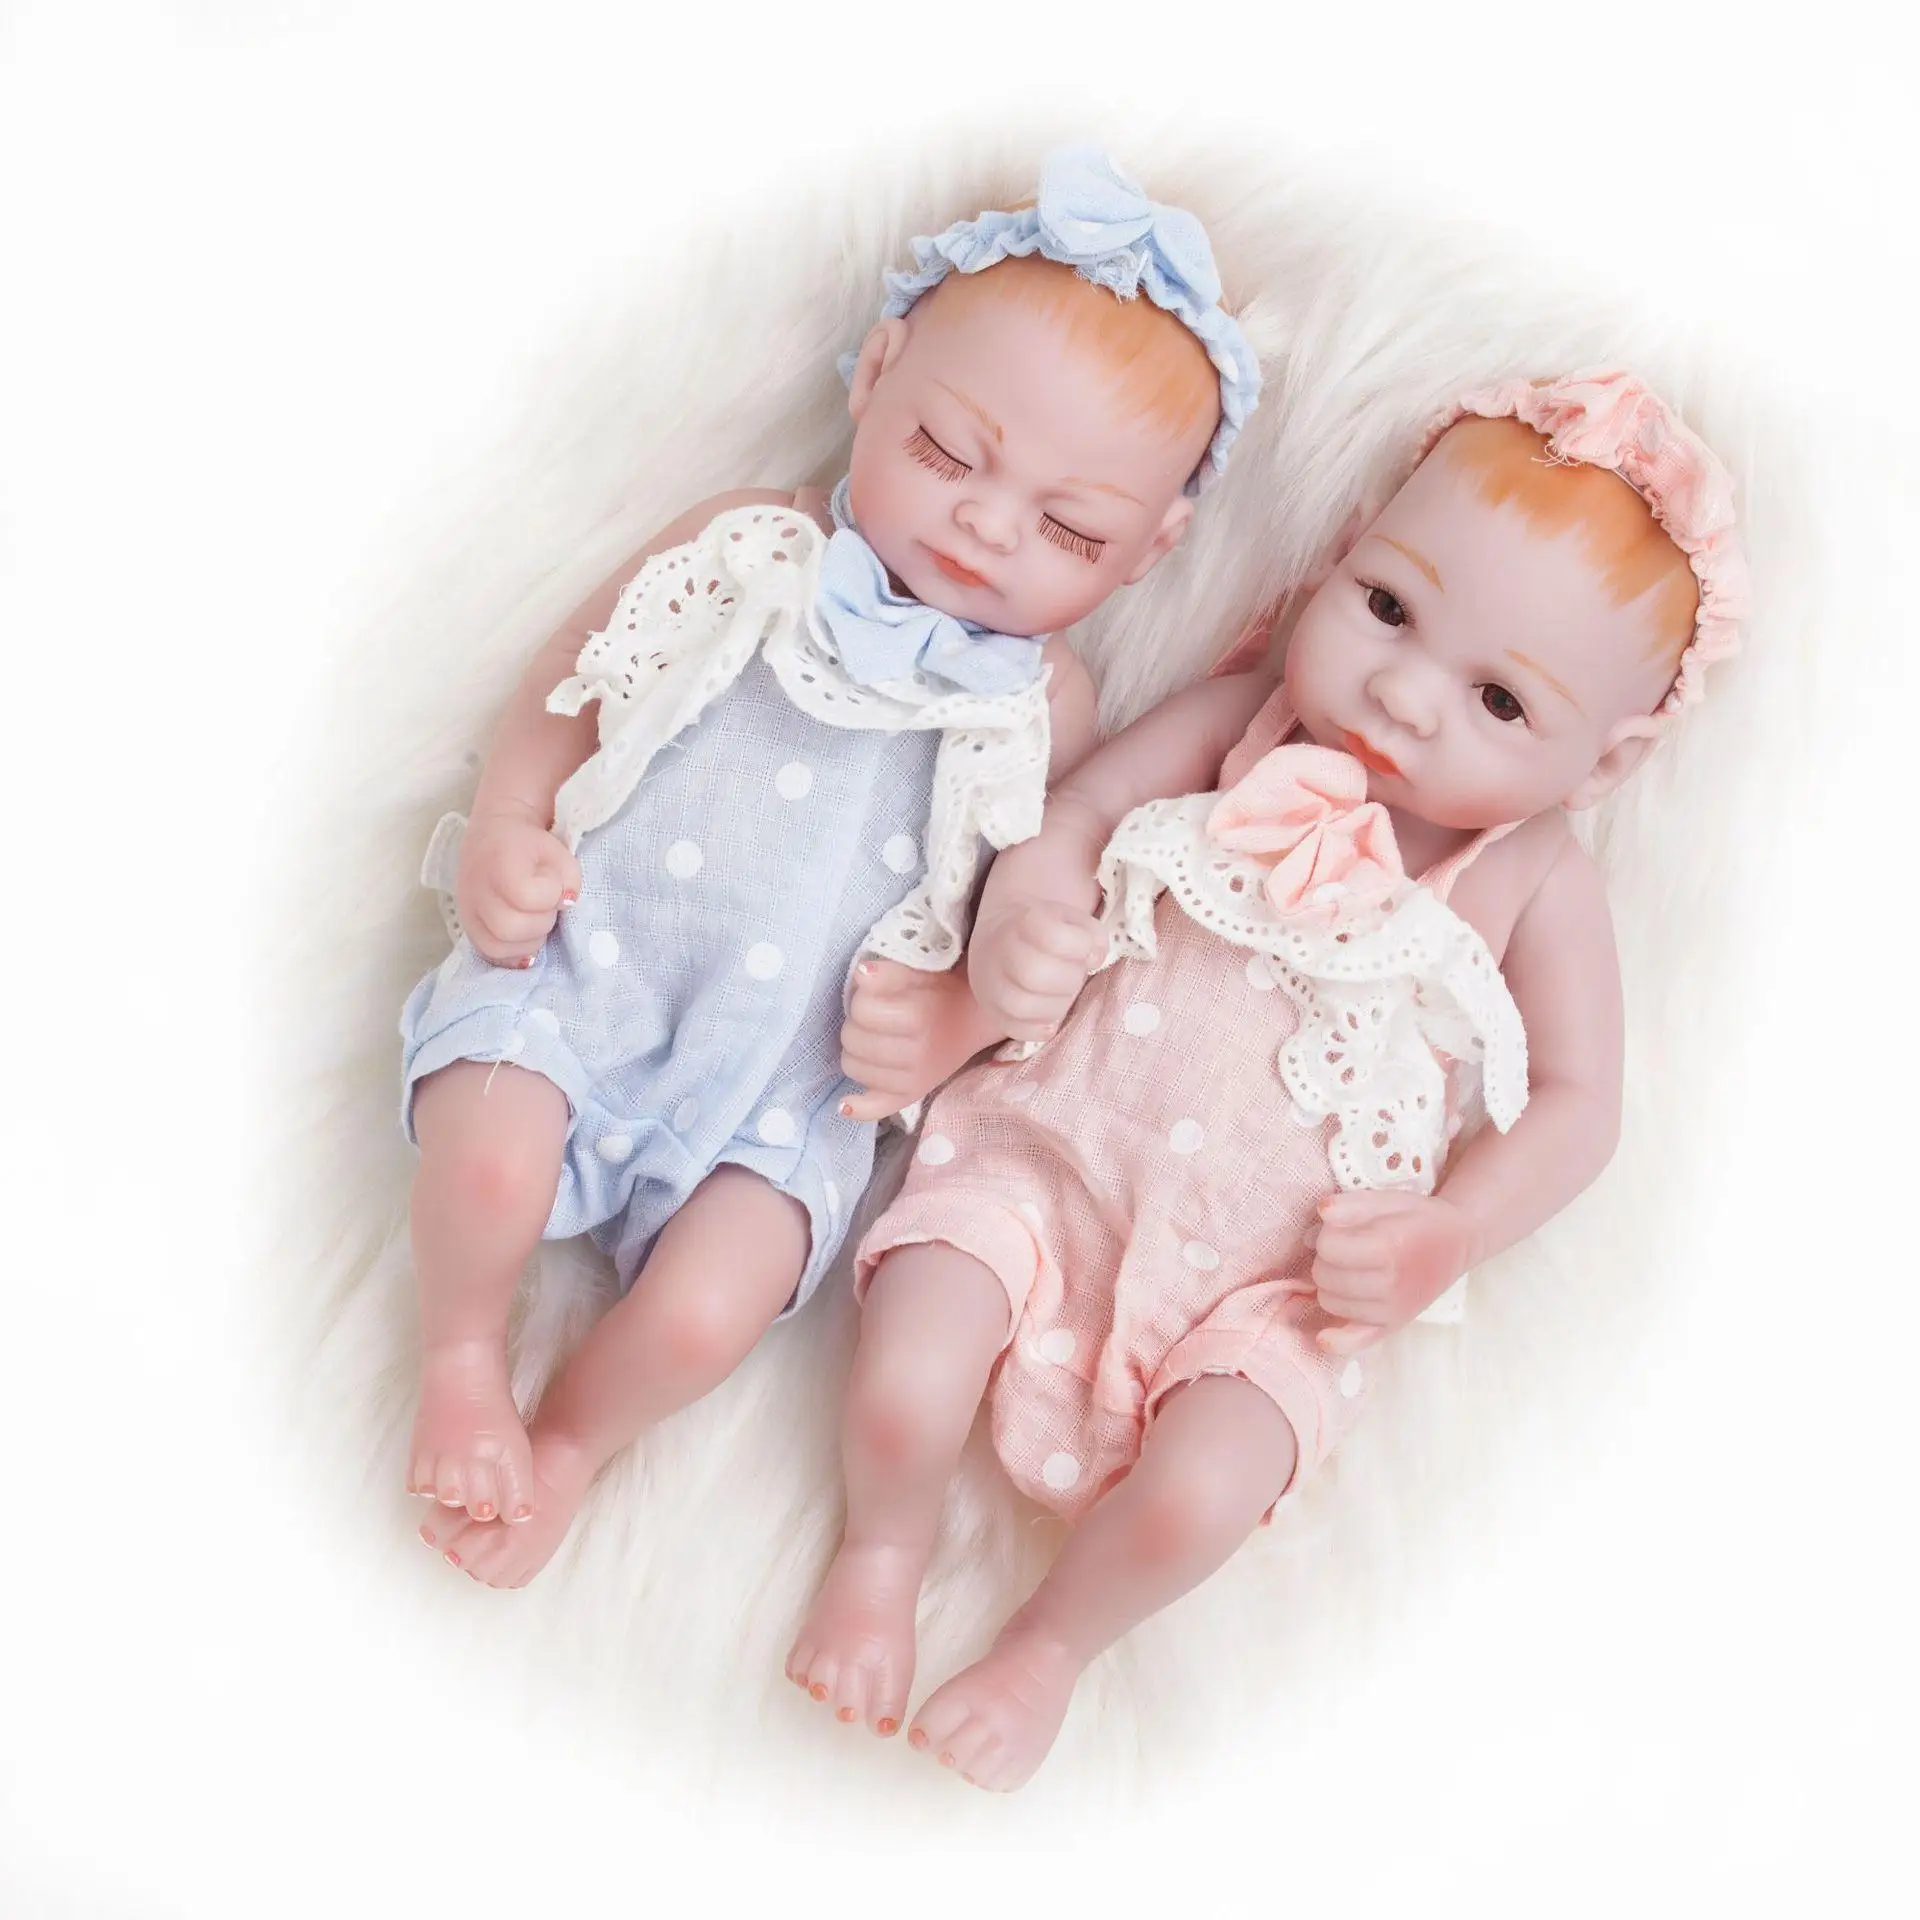 

Lifelike Silicone Doll Twins Baby Reborn 28 CM Realistic Babies Dolls With Lovely Clothes Kids Playmate